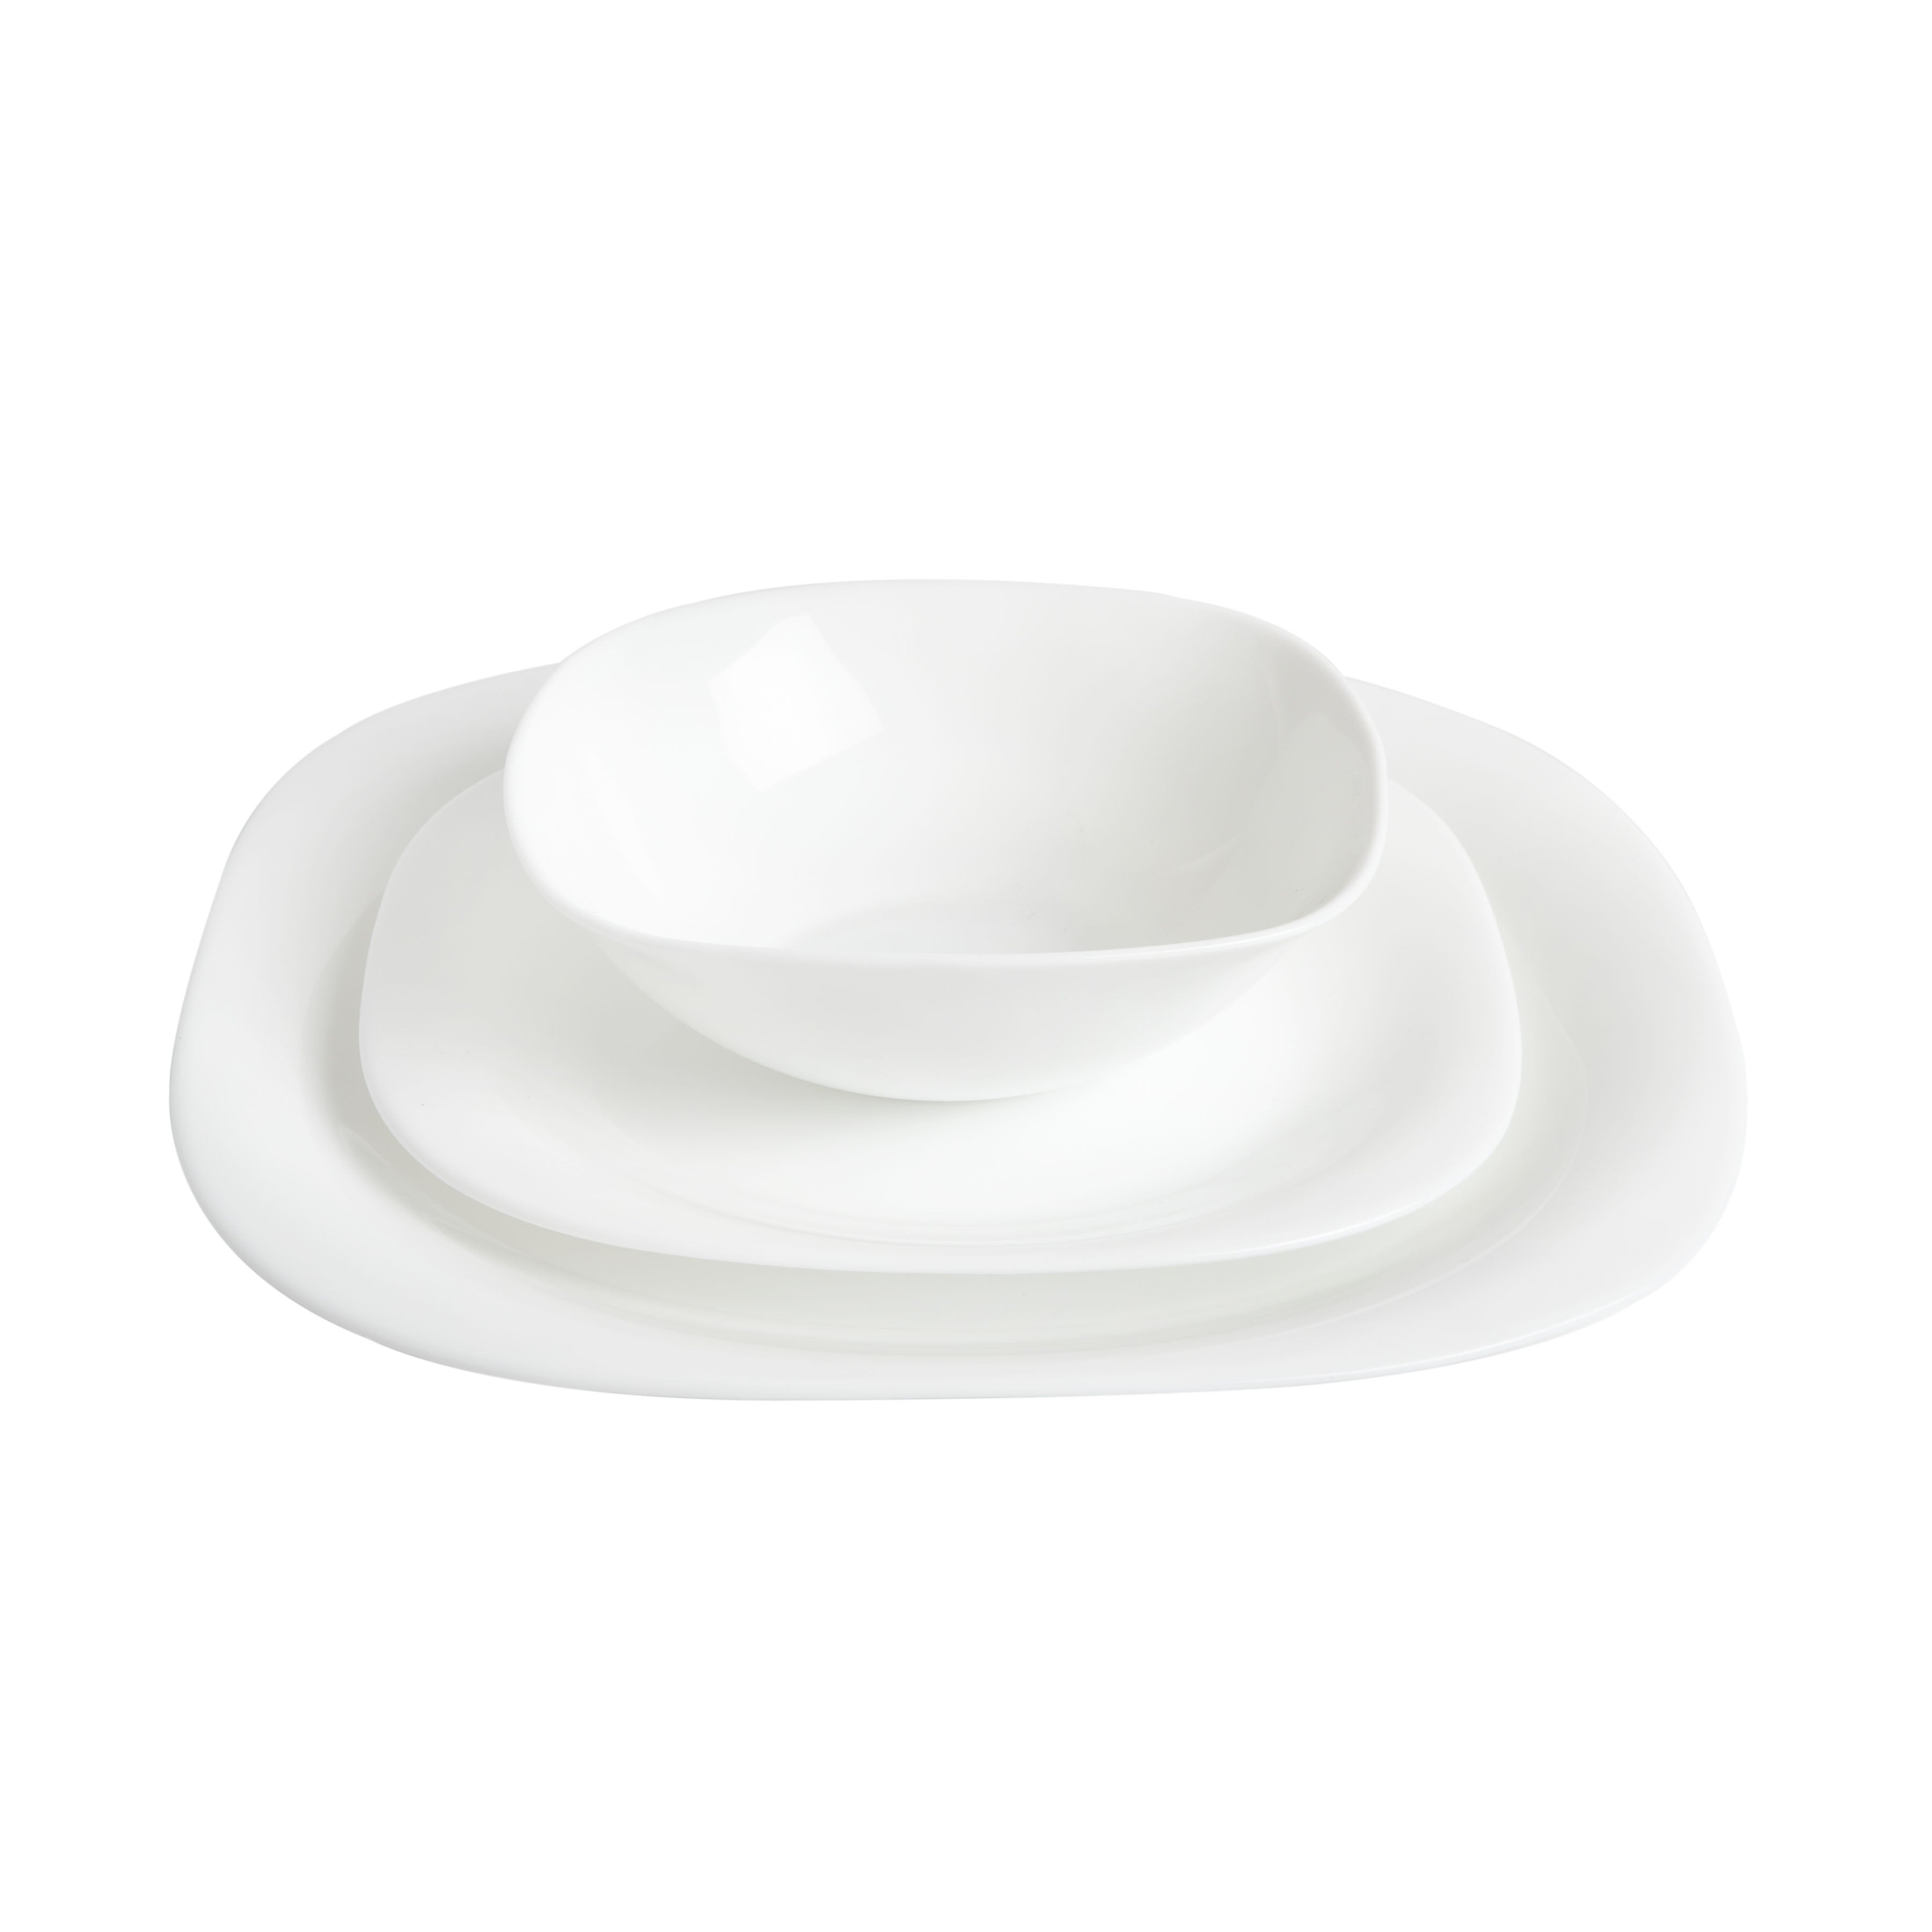 Excellanté Mica Black Collection 18-Inch Round Plate, White:  Dinner Plates: Dinner Plates